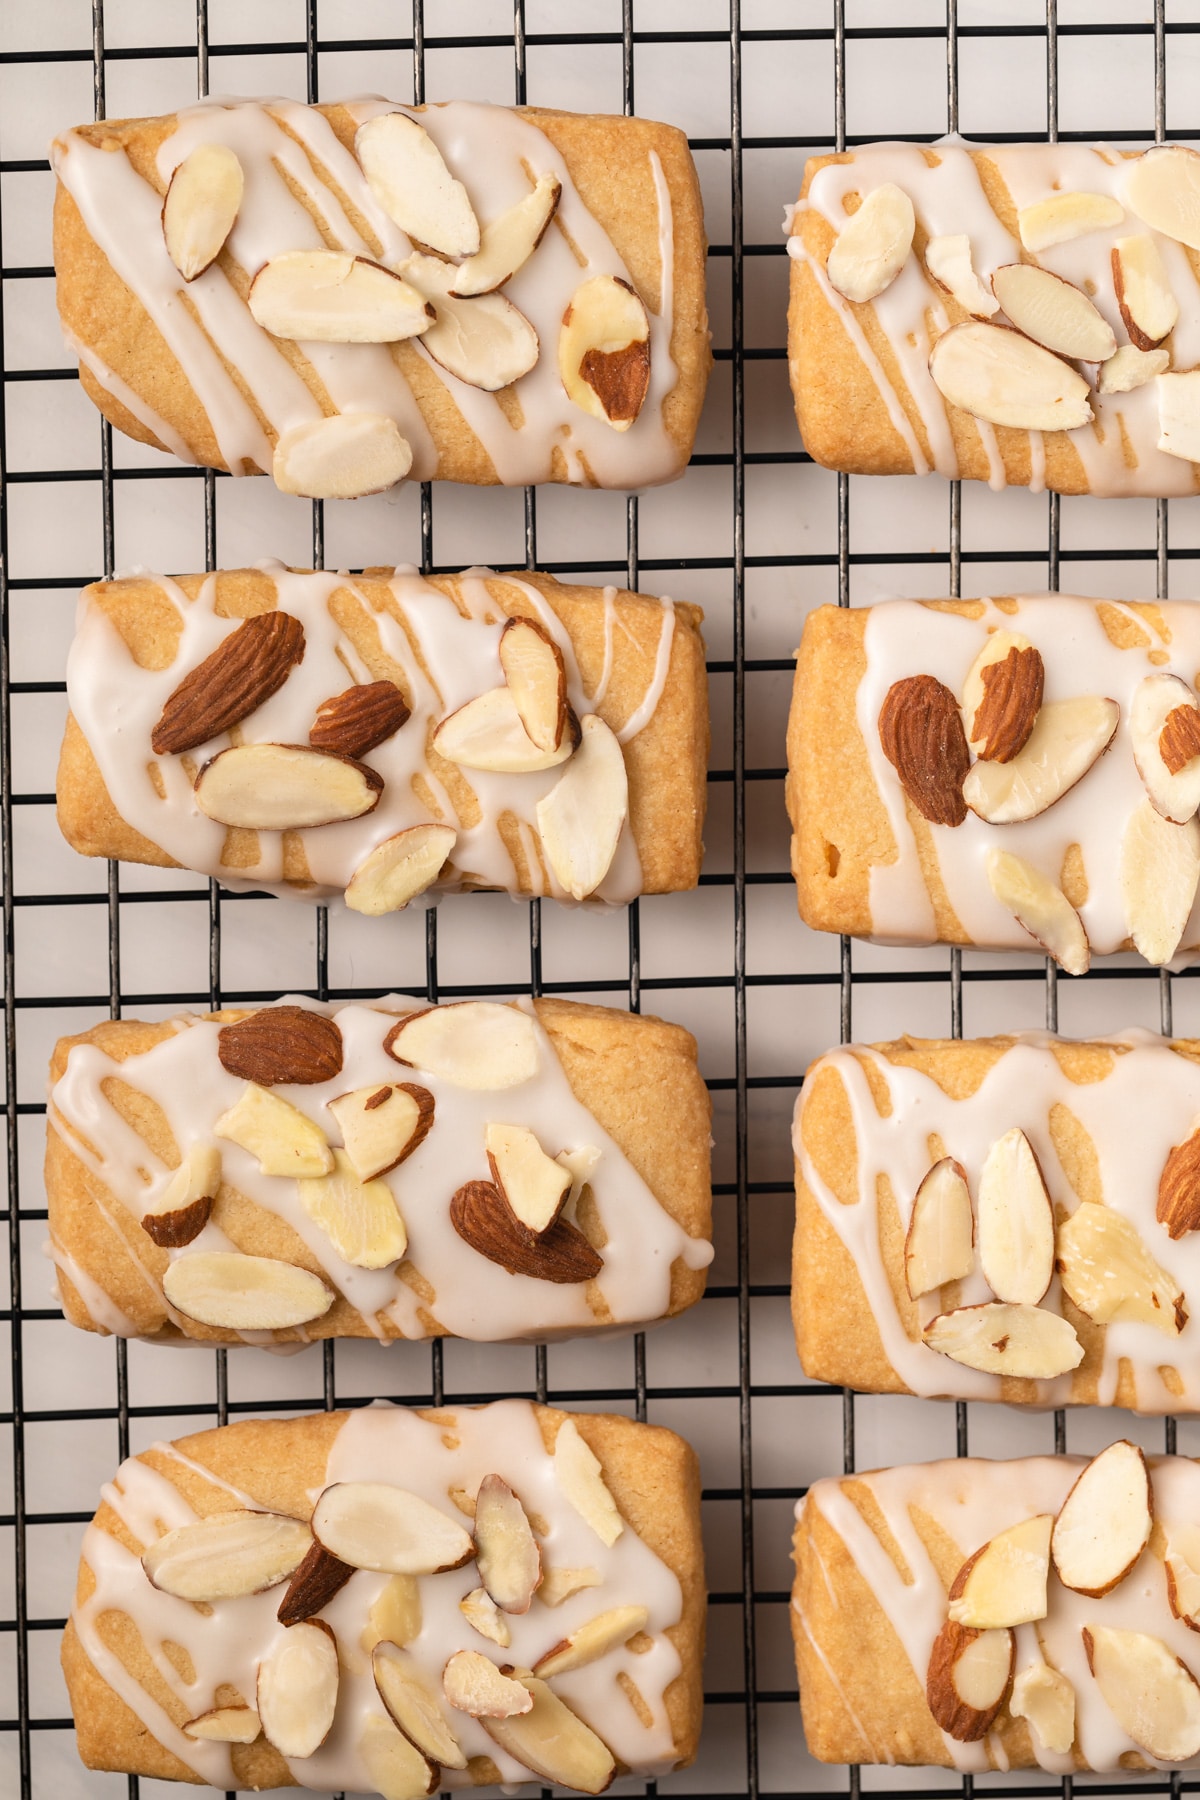 Almond bars on a wire rack.